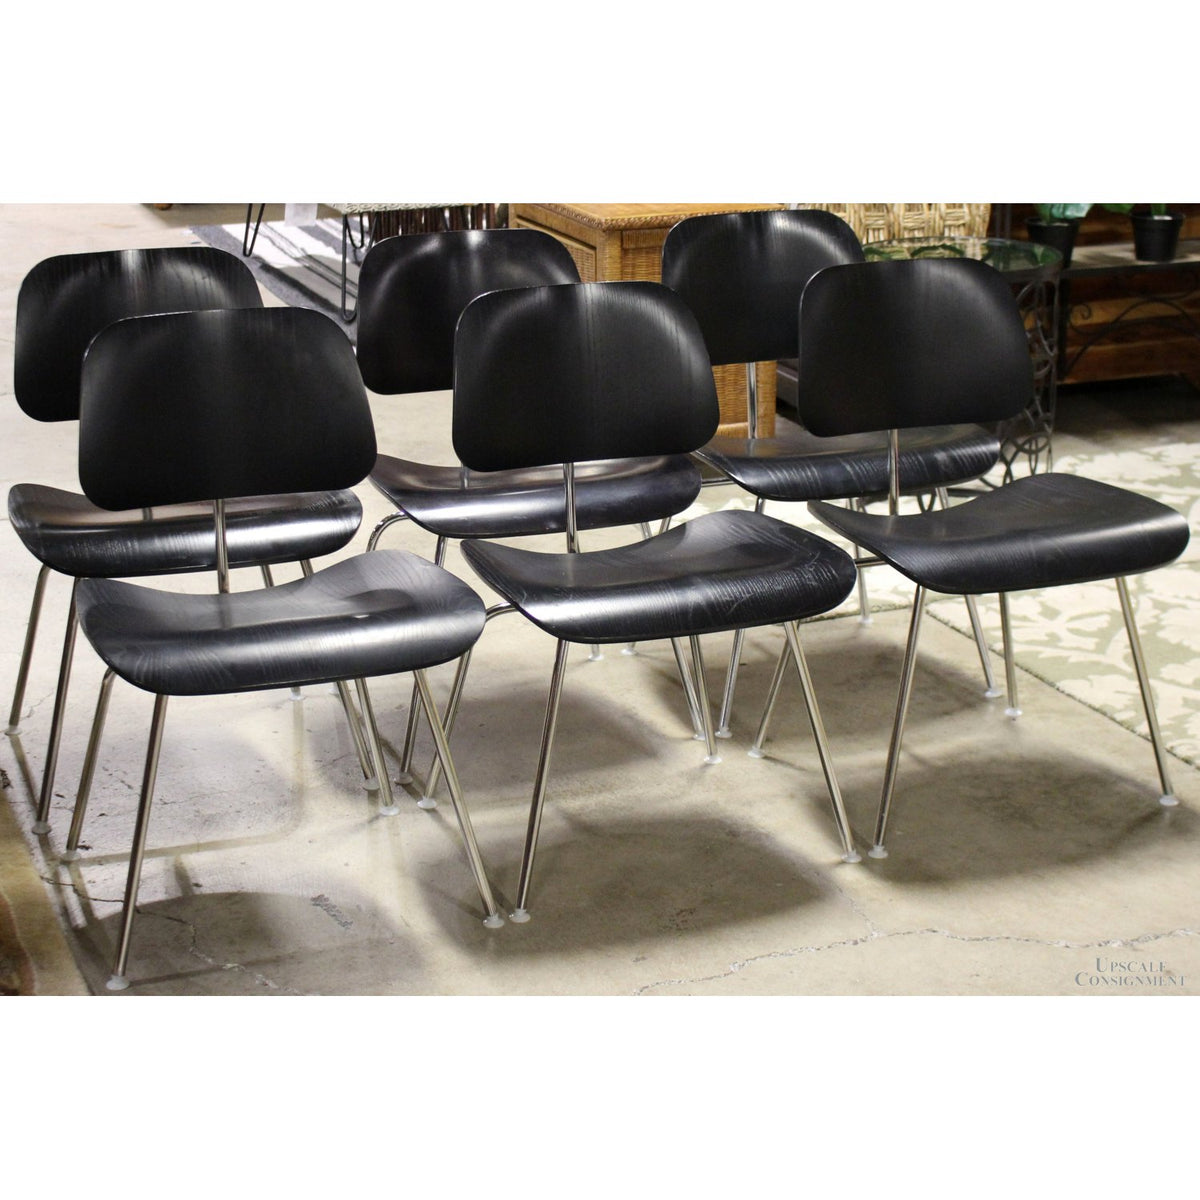 Herman Miller Set of 6 Eames Dining/Office Chairs